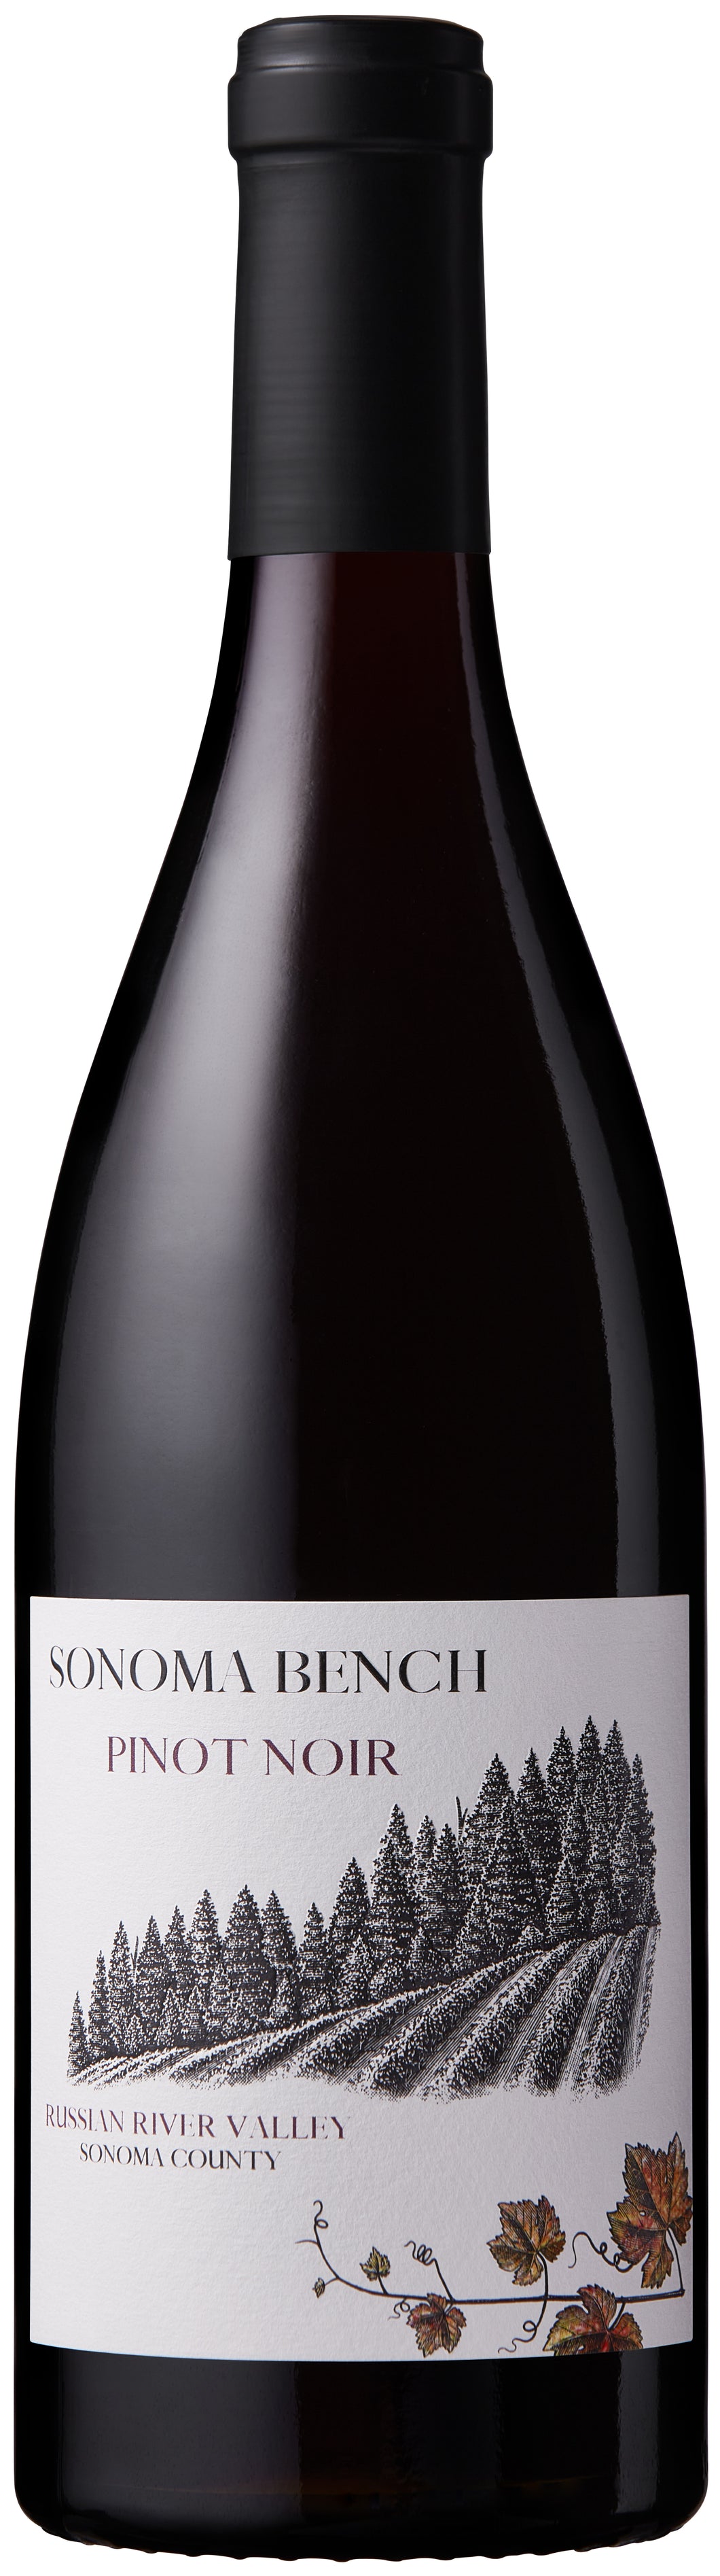 Sonoma Bench Russian River Valley Pinot Noir 2021